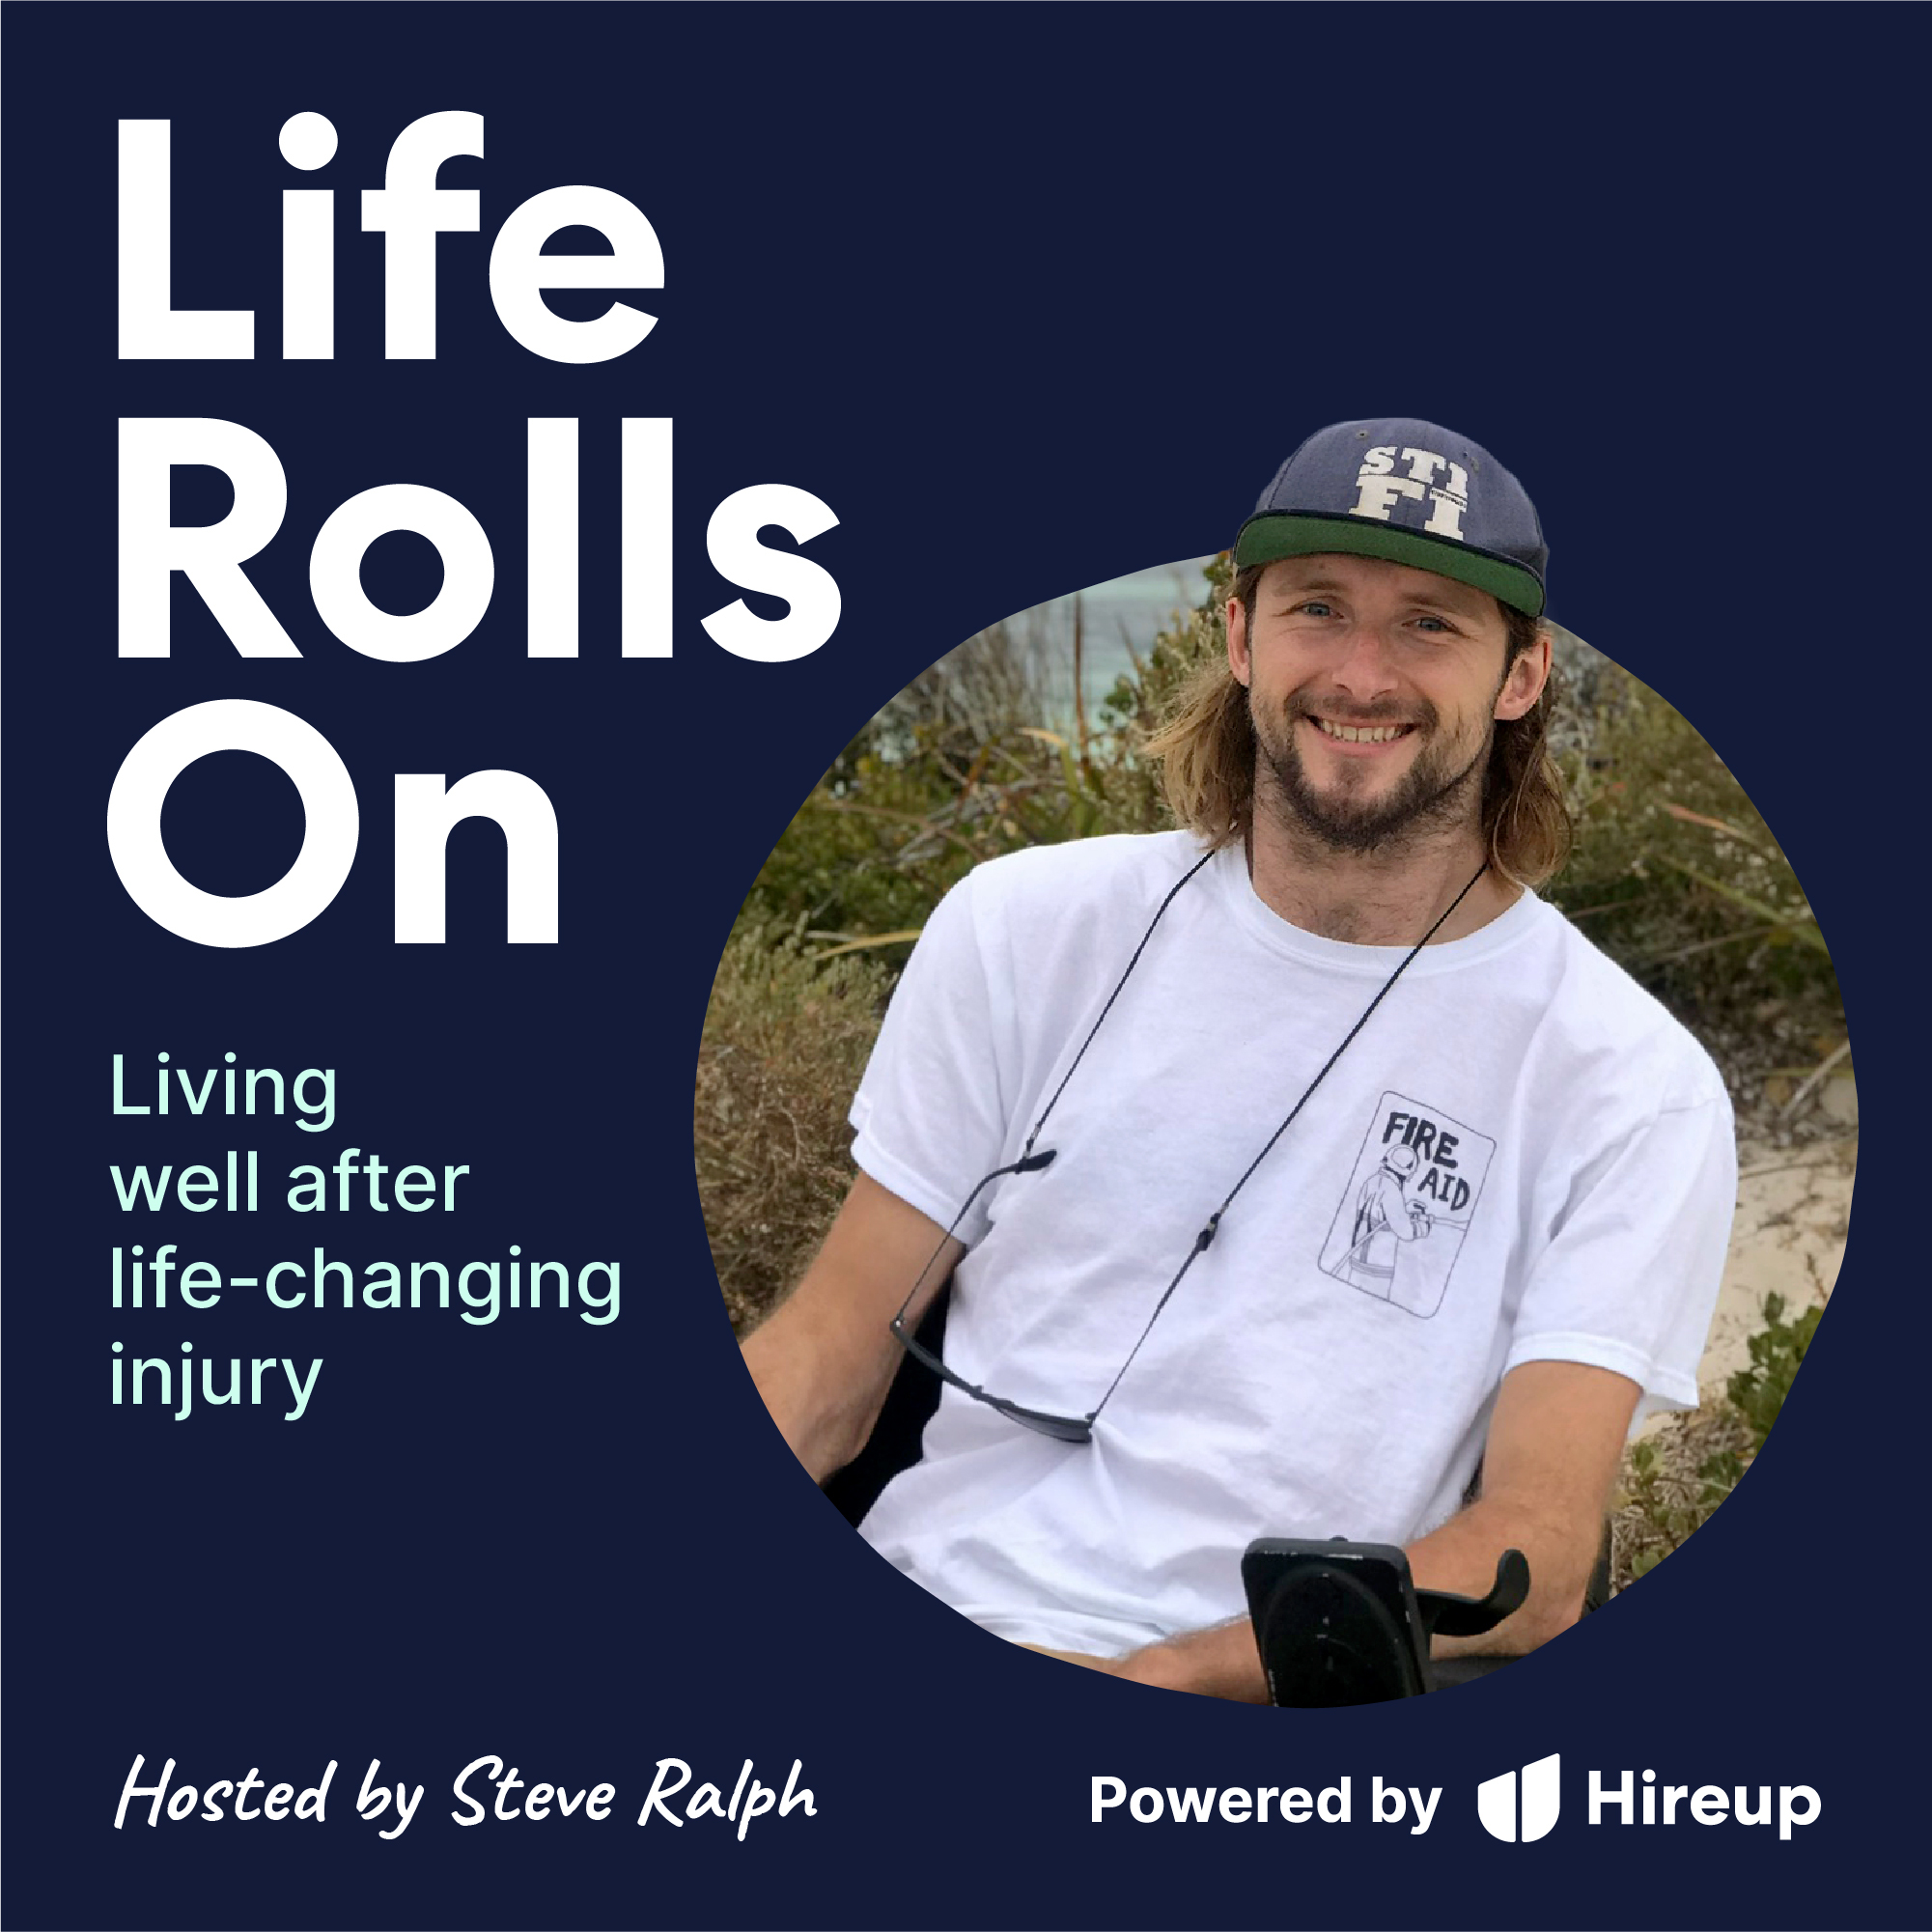 Life Rolls On trailer - A podcast about living well after life-changing injury